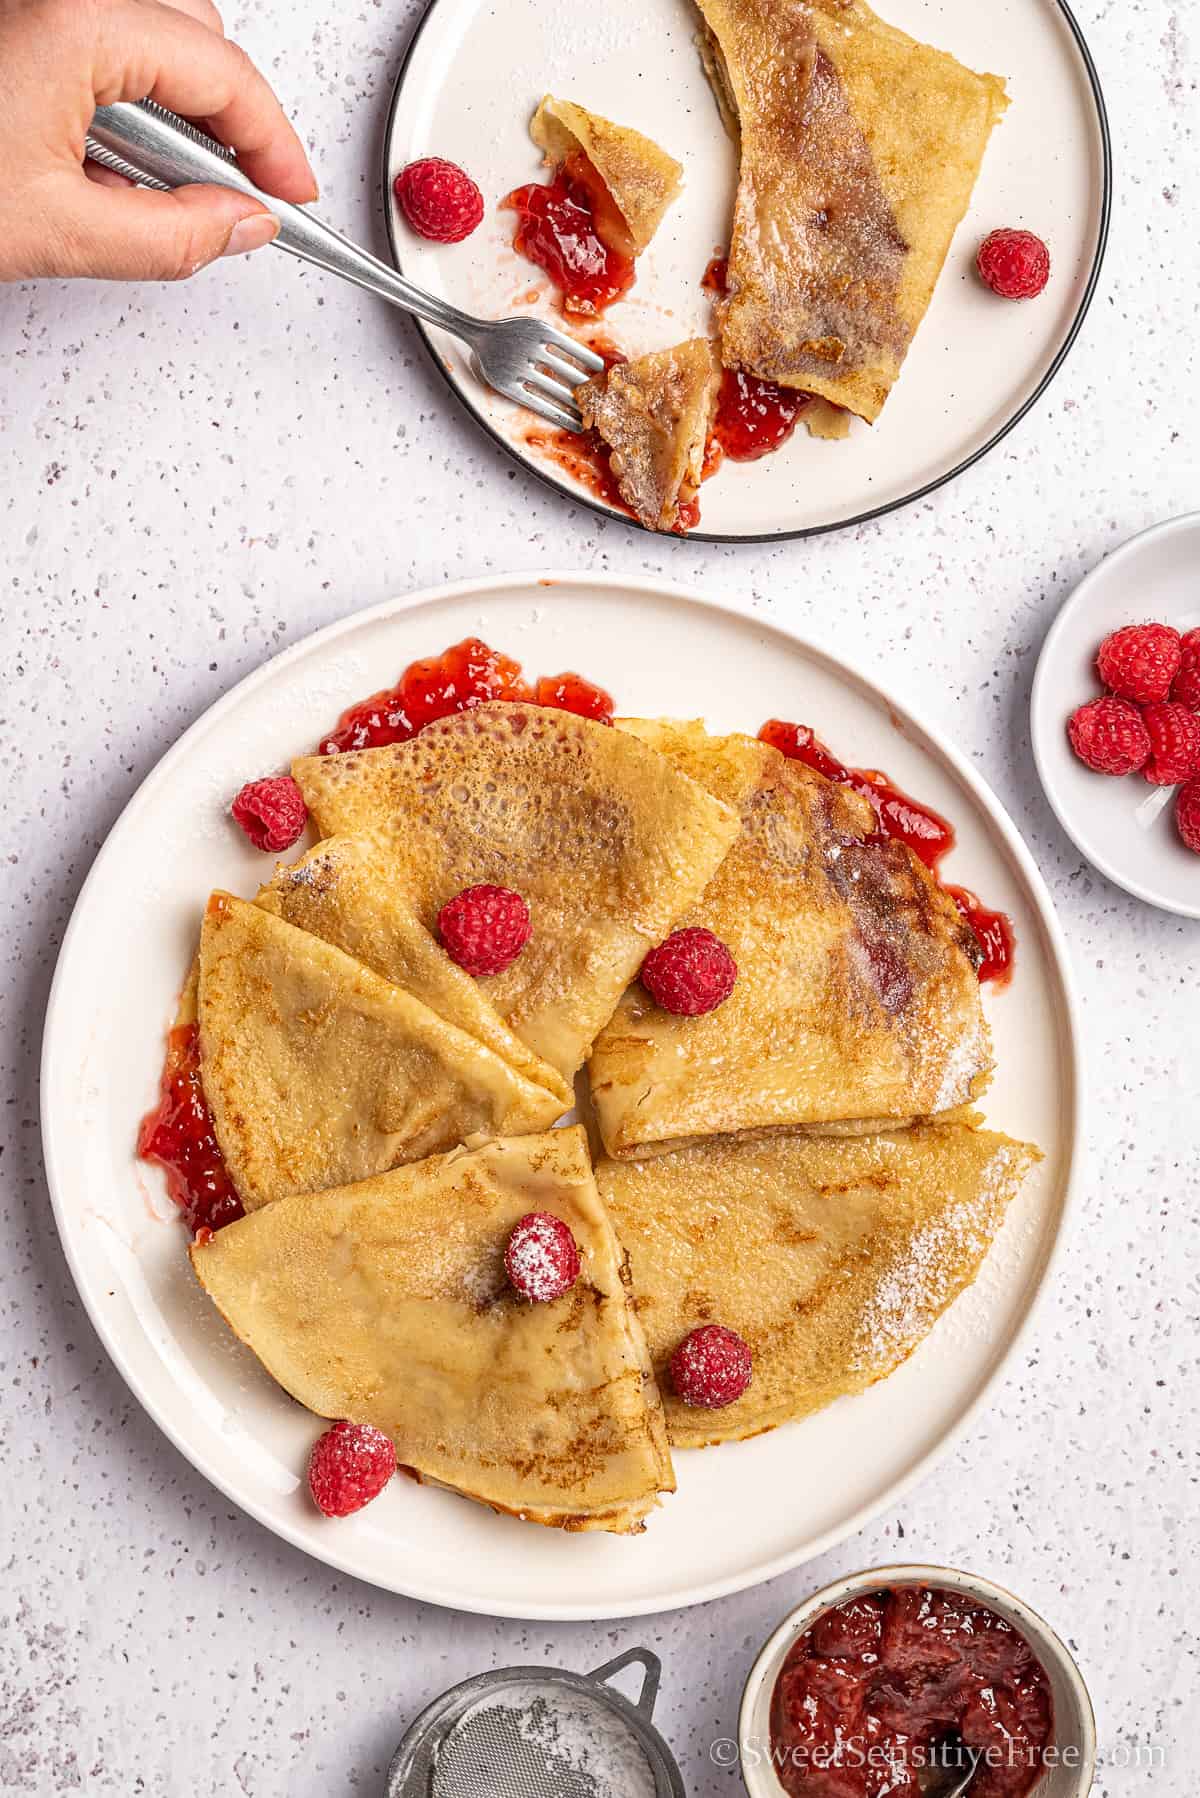 plates with servings of vegan crepes